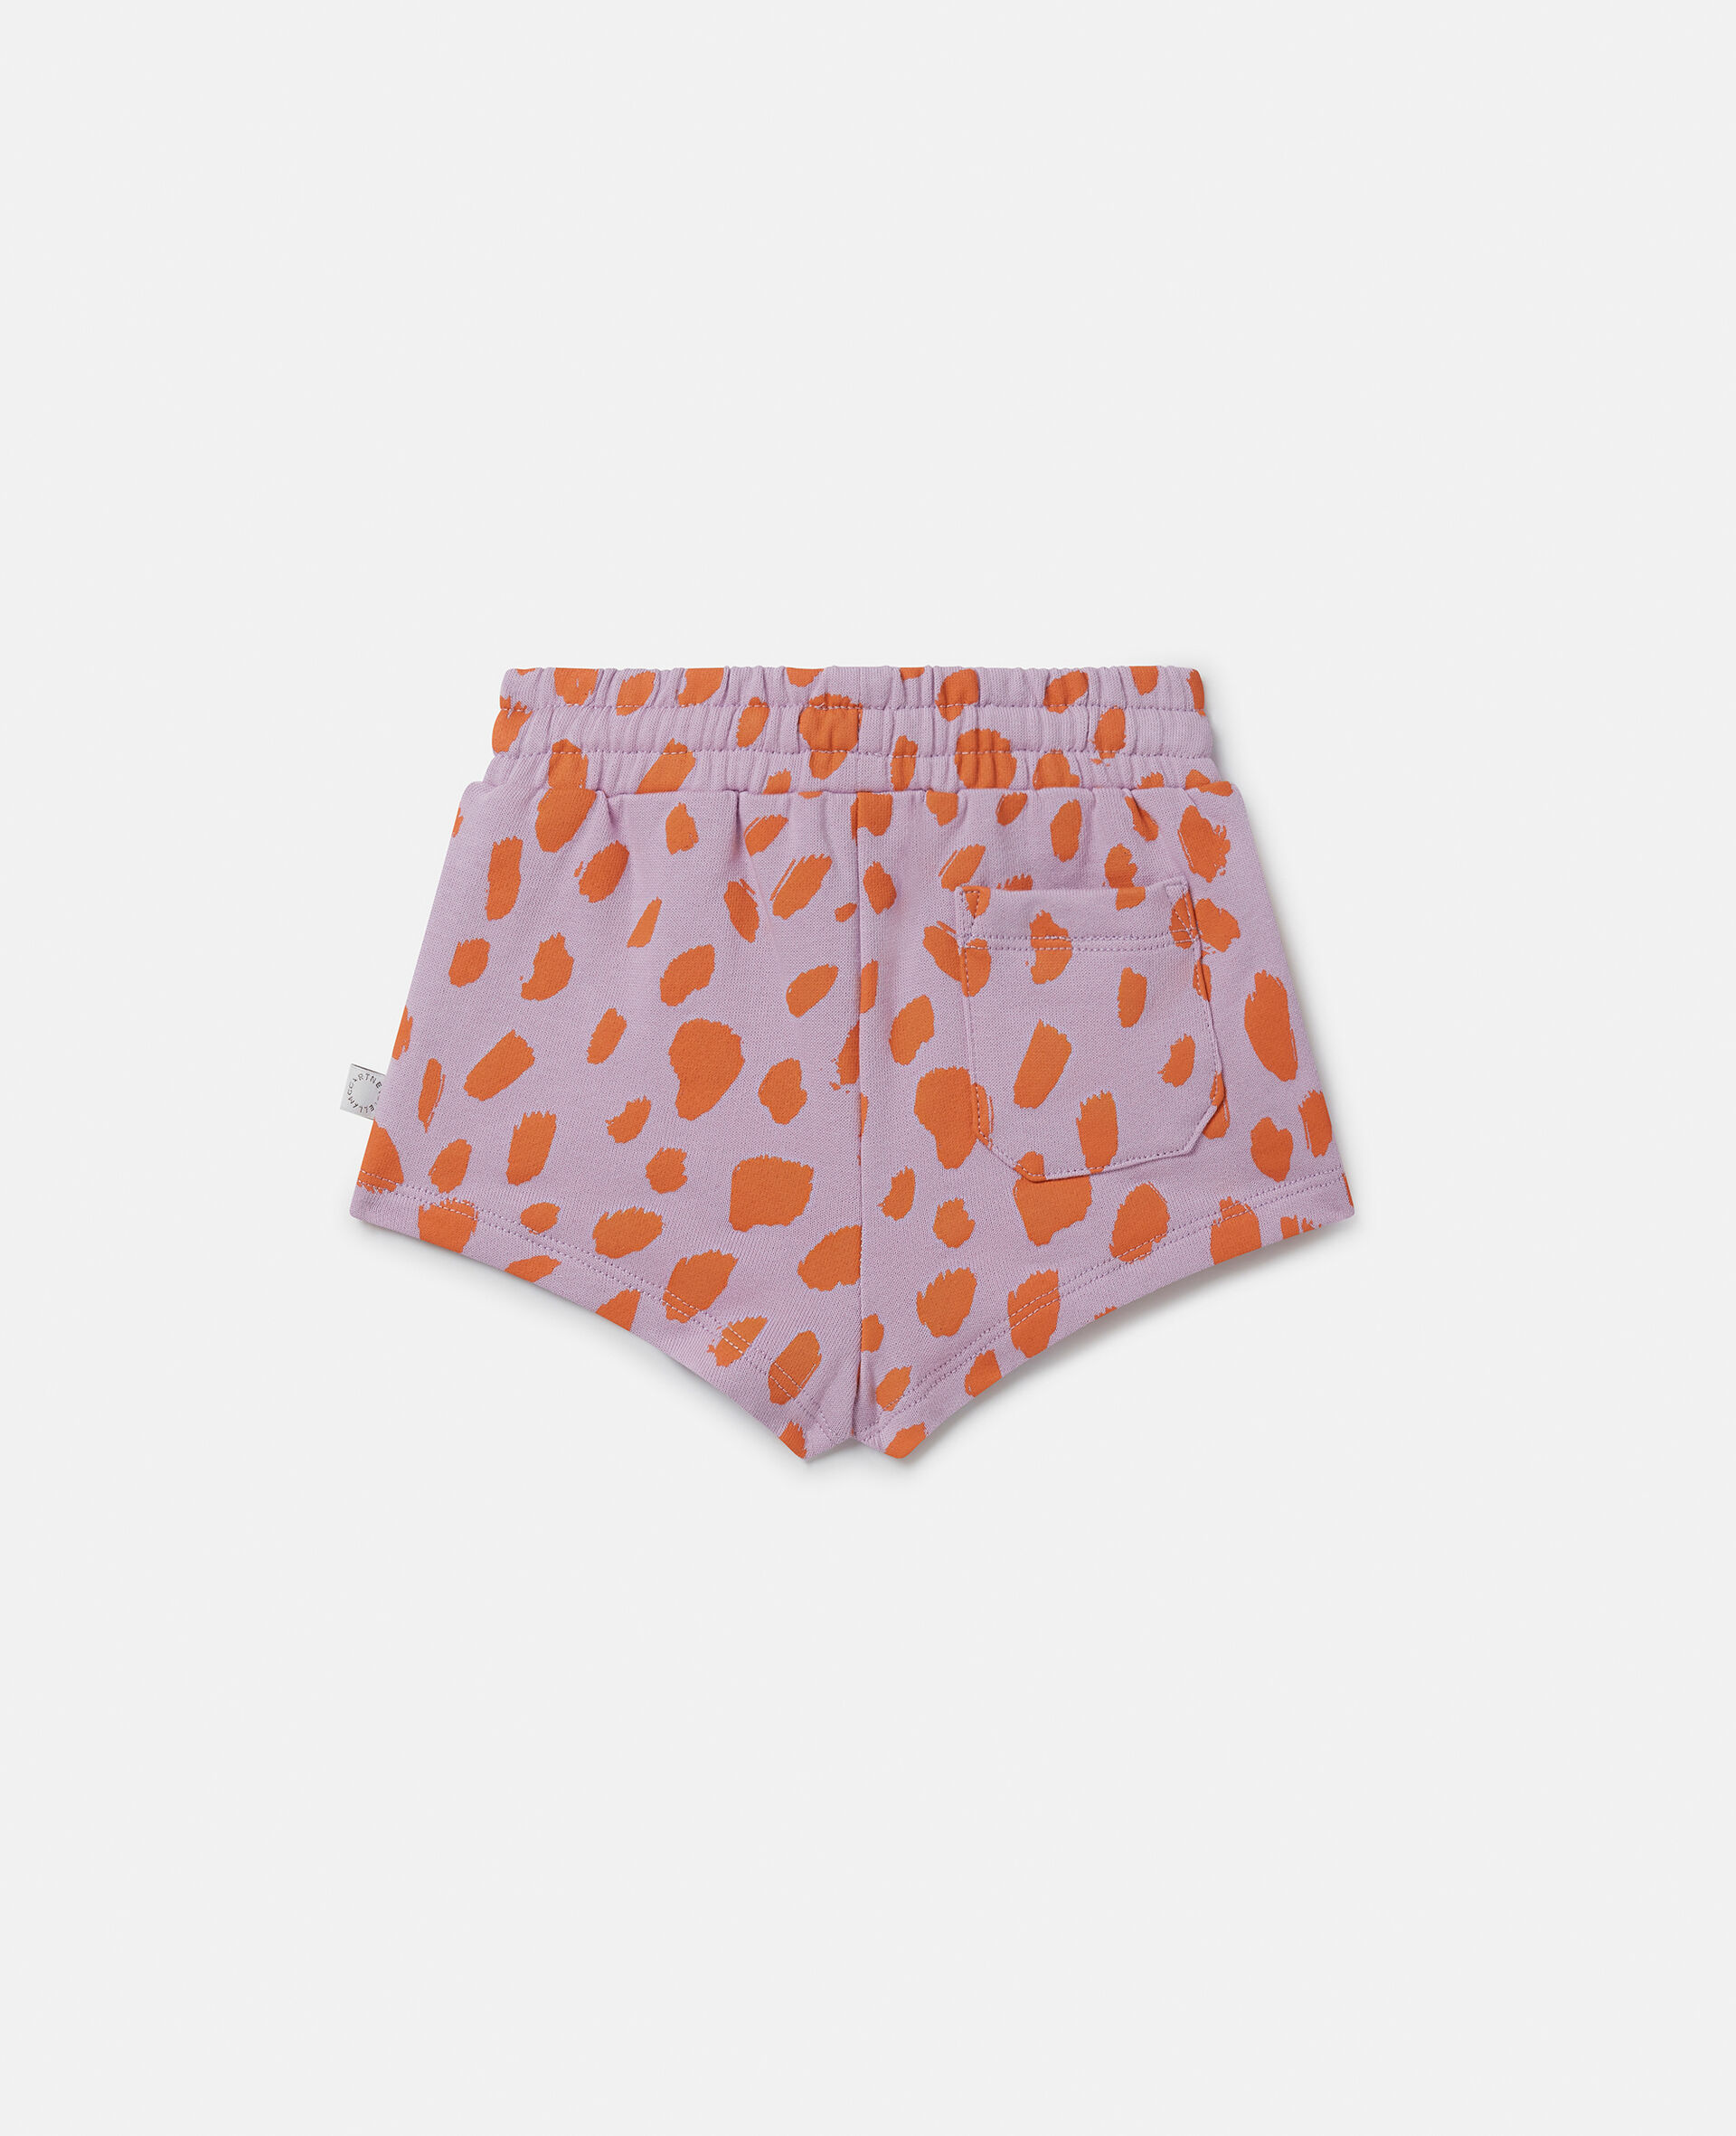 Neon Leopard Print Sweat Shorts-Red-large image number 2